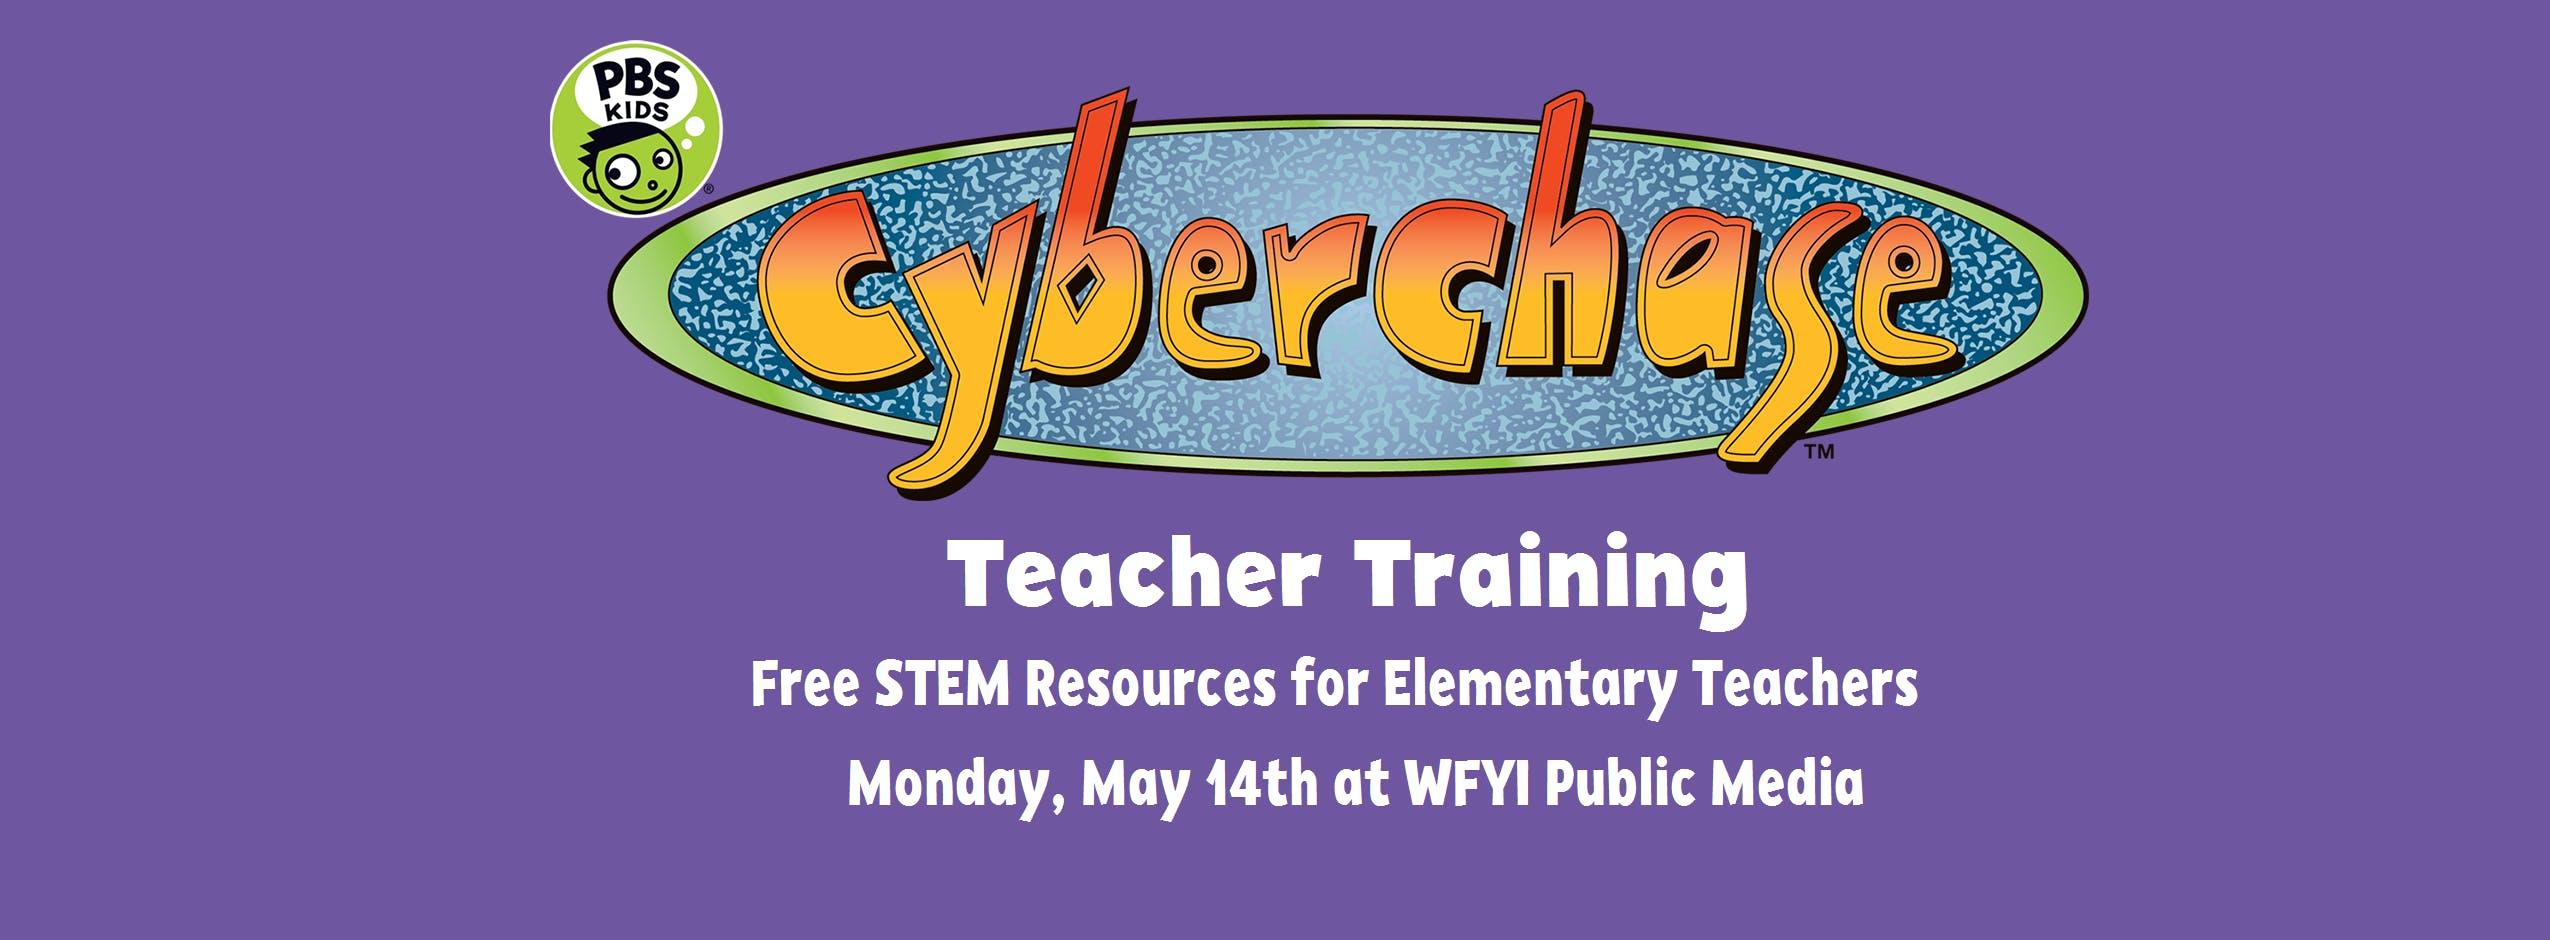 Cyberchase Logo - Cyberchase Teacher Training: NEW PBS Kids STEM Resources MAY 2018